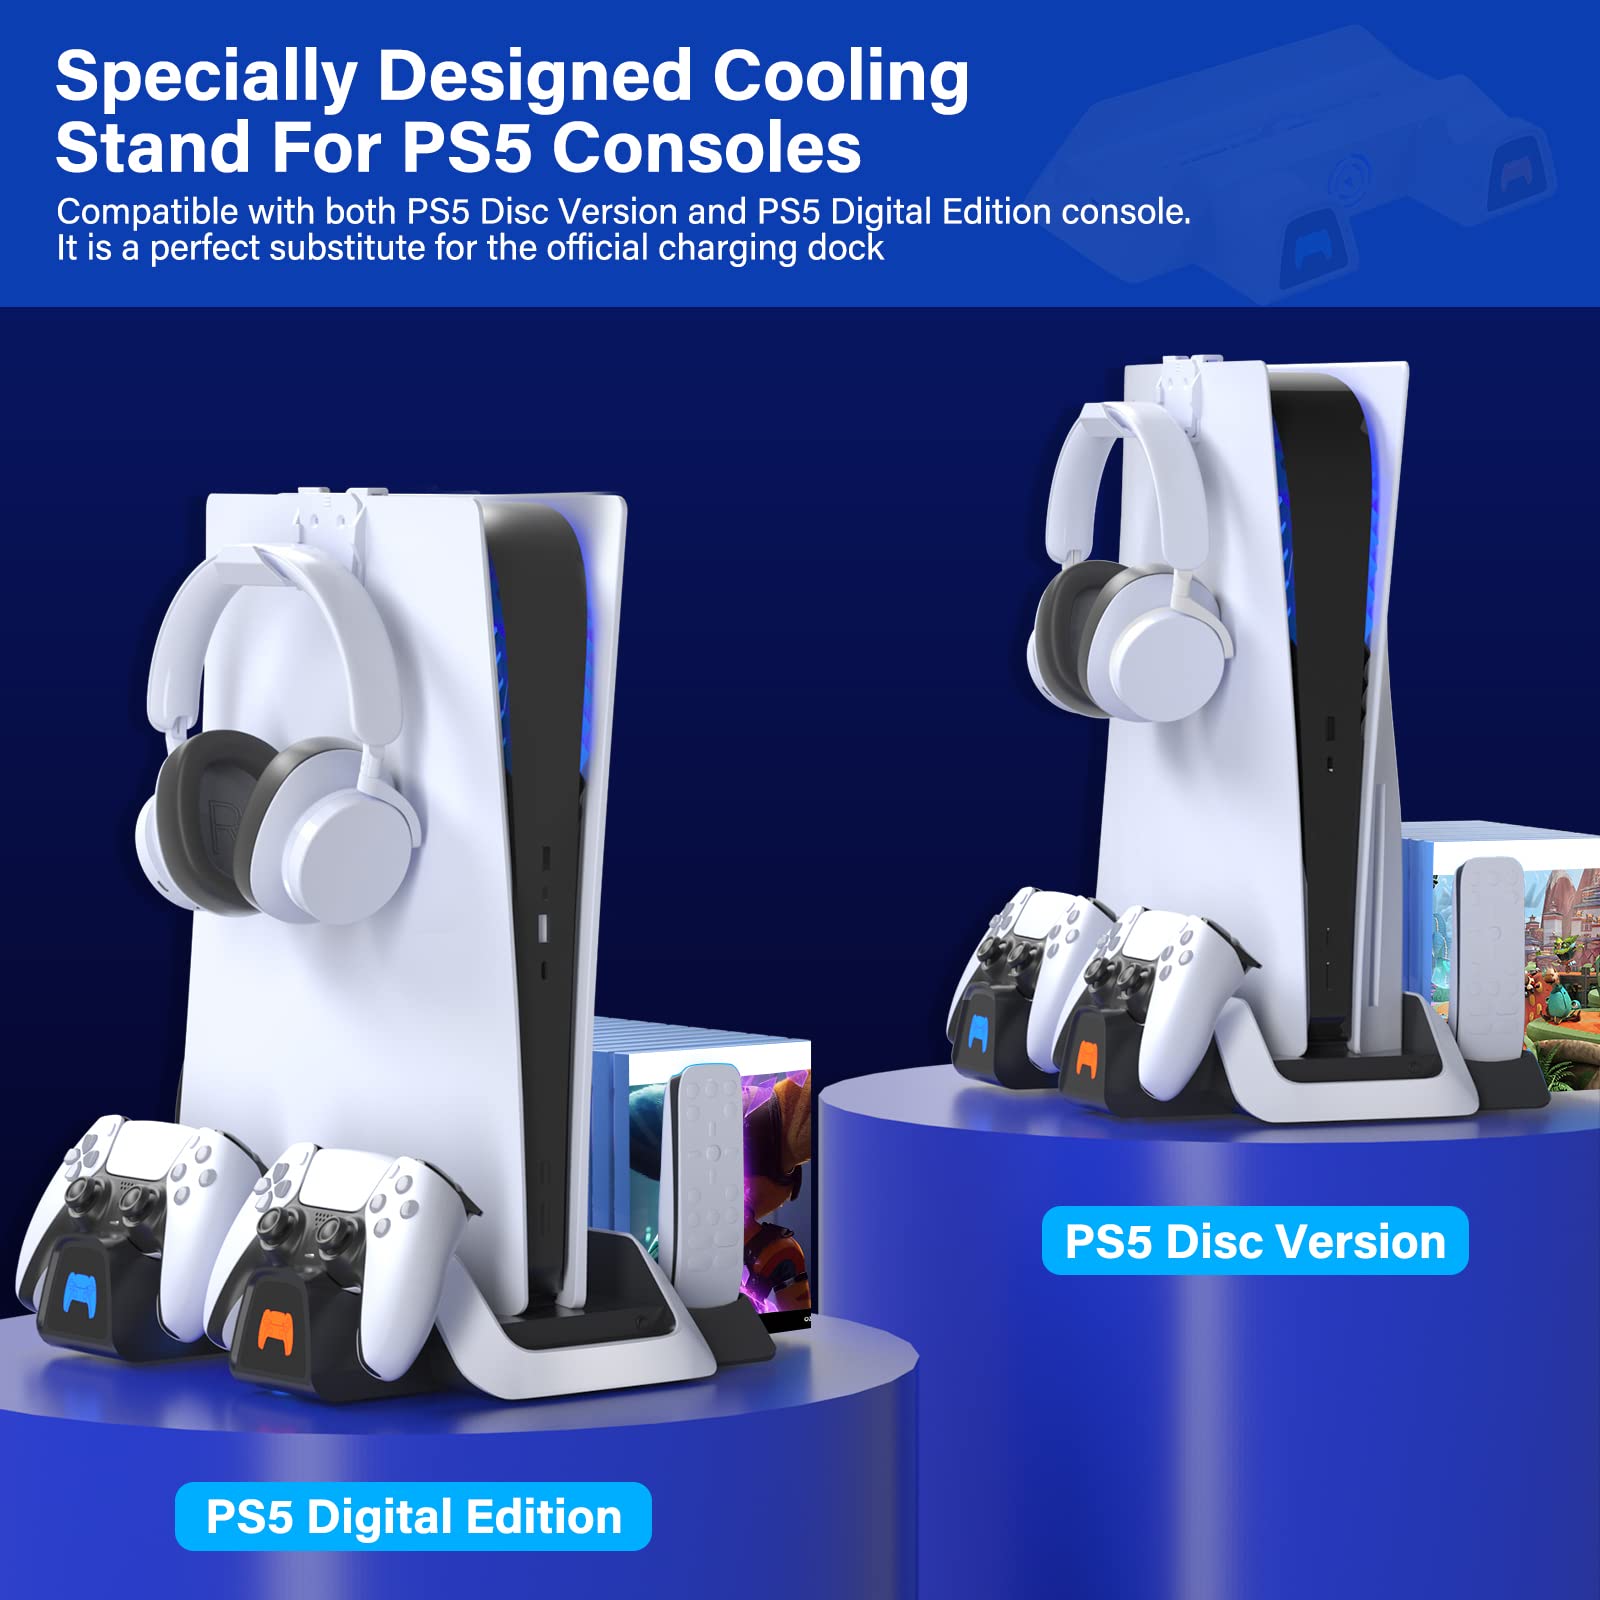 PS5 Stand and Cooling Station with Dual PS5 Controller Charging Station for Playstation 5 PS5 Console Disc/Digital Edition, PS5 Accessories, Cooling Fan, Headset Holder, 11 Game Slots, Black